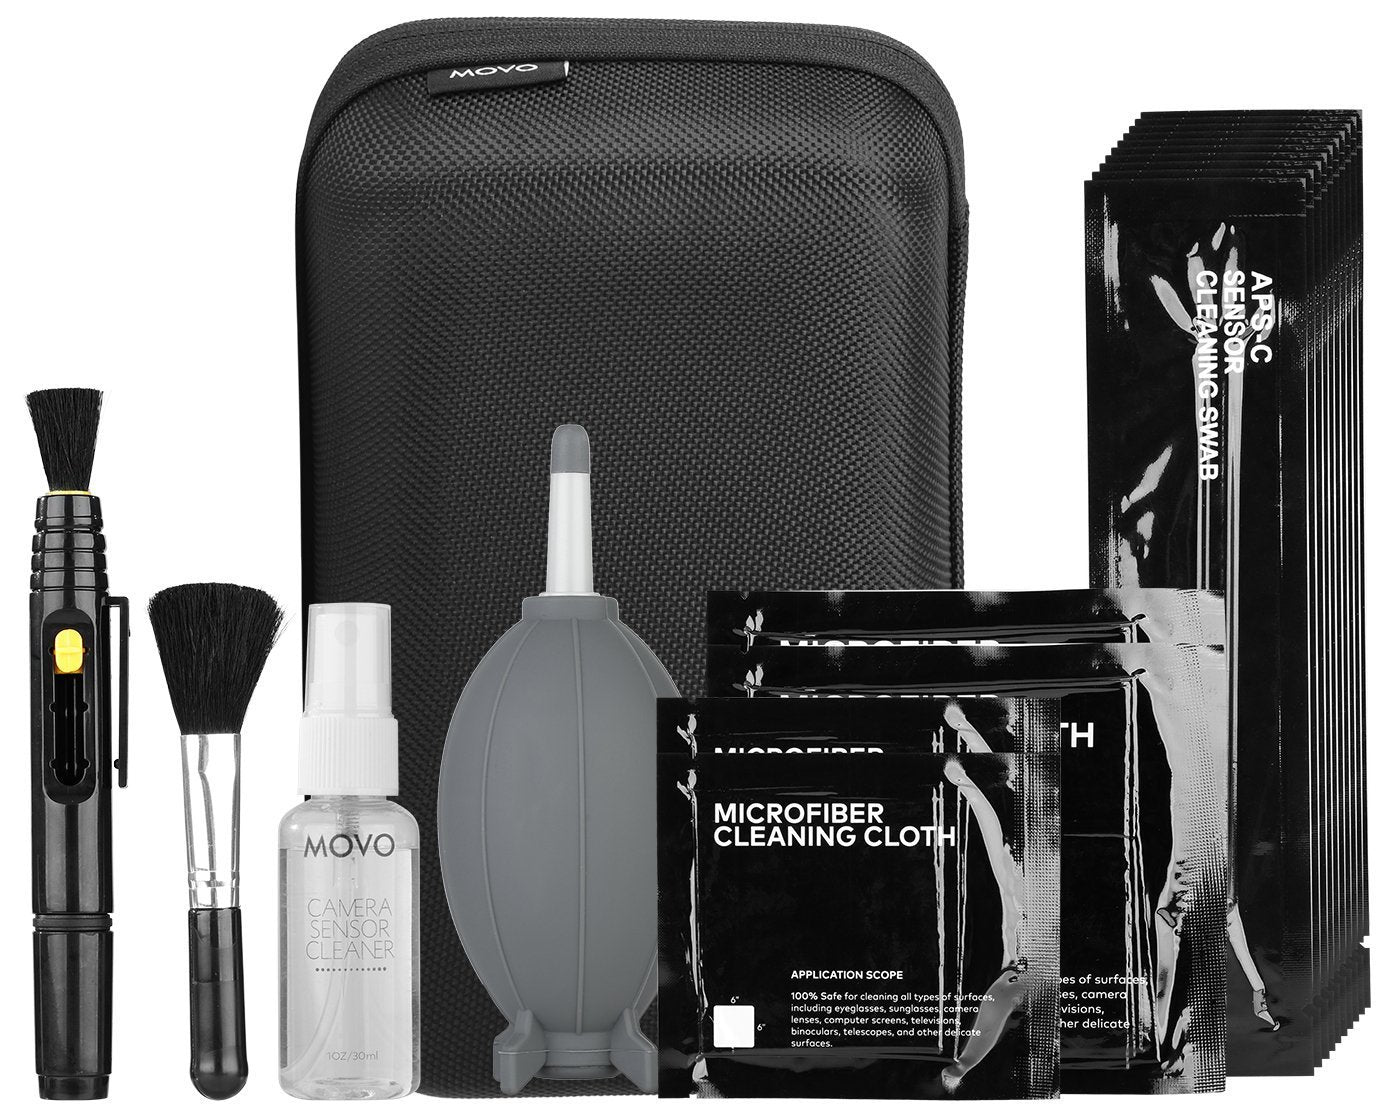 Movo Deluxe Essentials DSLR Camera Cleaning Kit with 10 APS-C Cleaning Swabs, Sensor Cleaning Fluid, Rocket Air Blower, Lens Pen, Soft Brush, 2X Small and 2X Large Microfiber Cloths and Carrying Case  - Acceptable